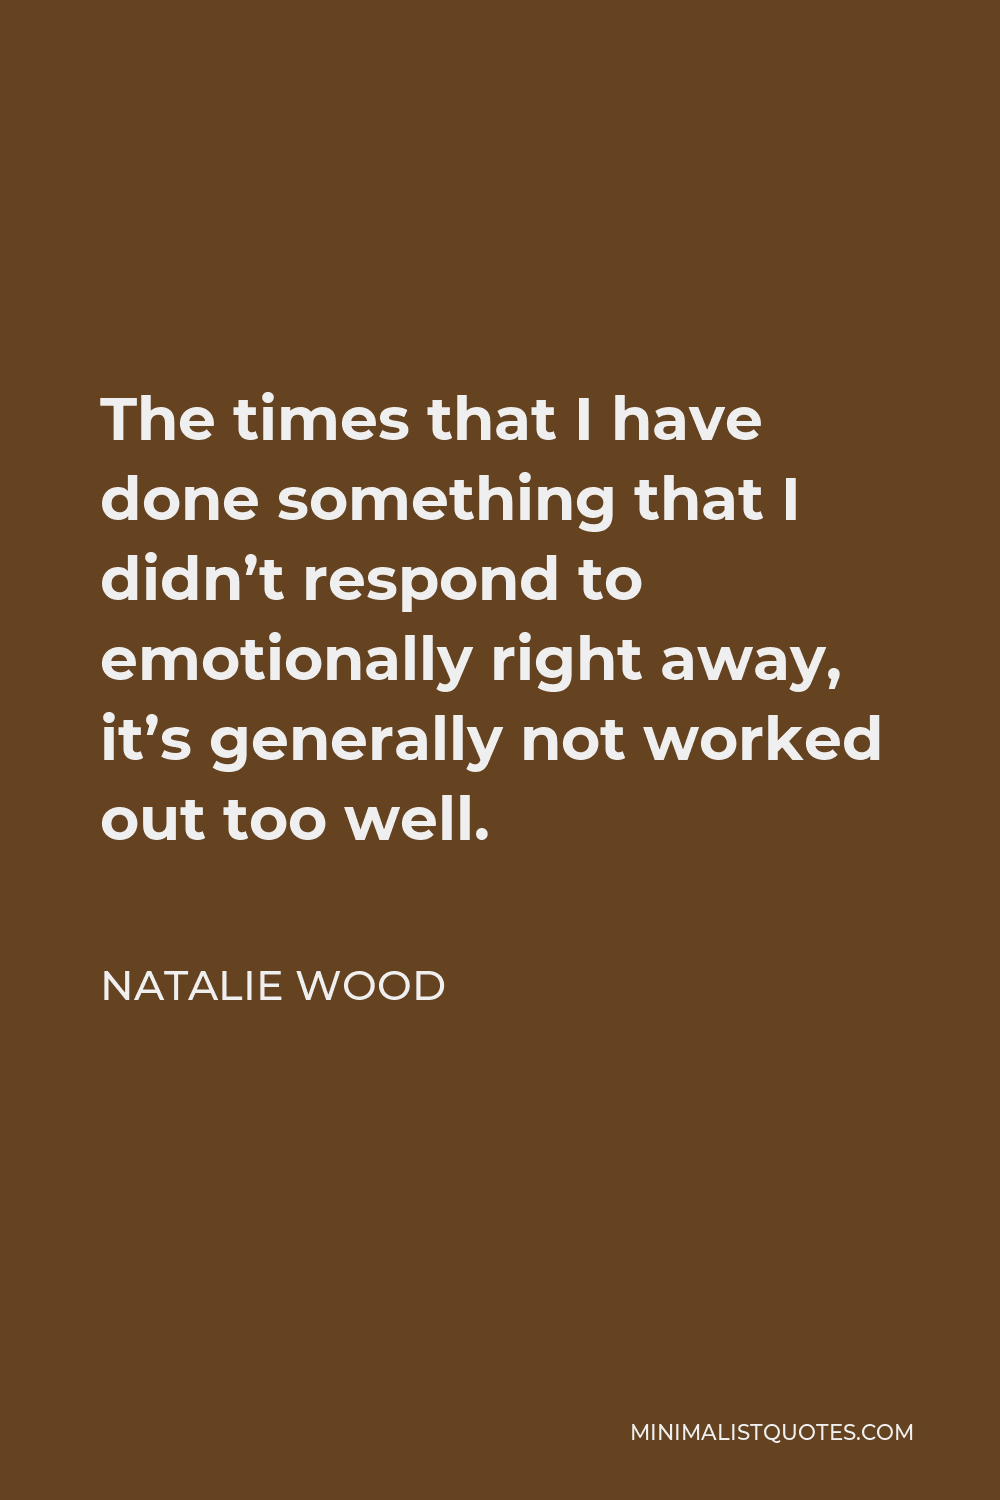 Natalie Wood Quote - The times that I have done something that I didn’t respond to emotionally right away, it’s generally not worked out too well.